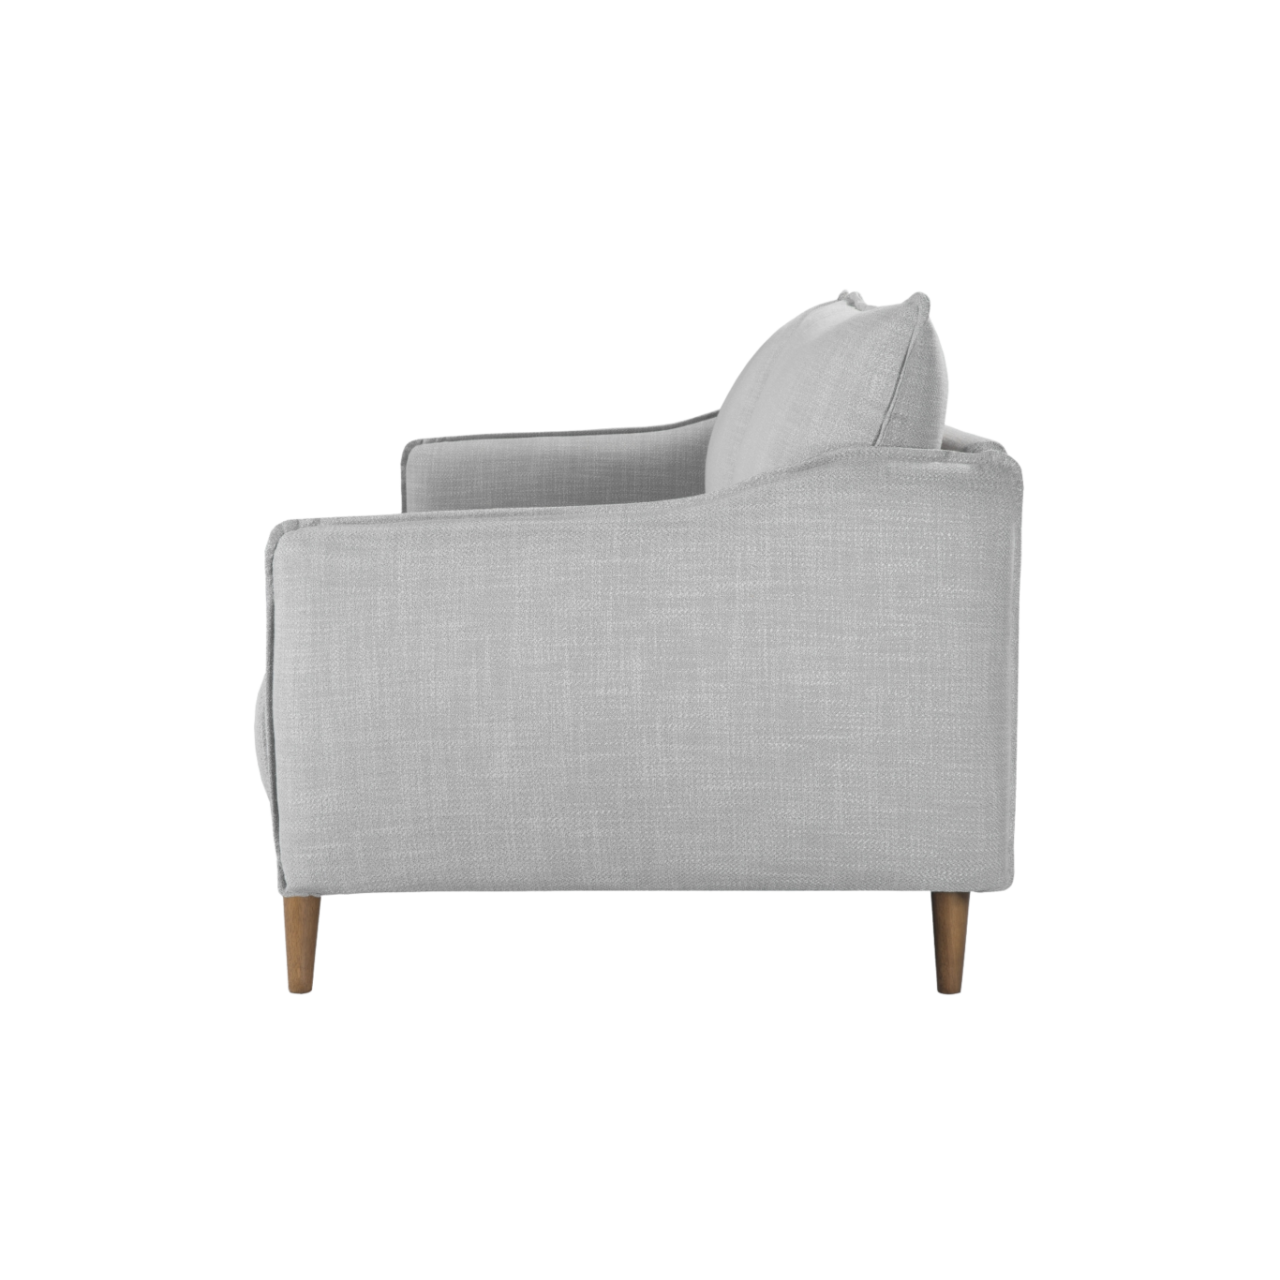 side view of Simple, modern 2 seater sofa upholstered in grey linen fabric